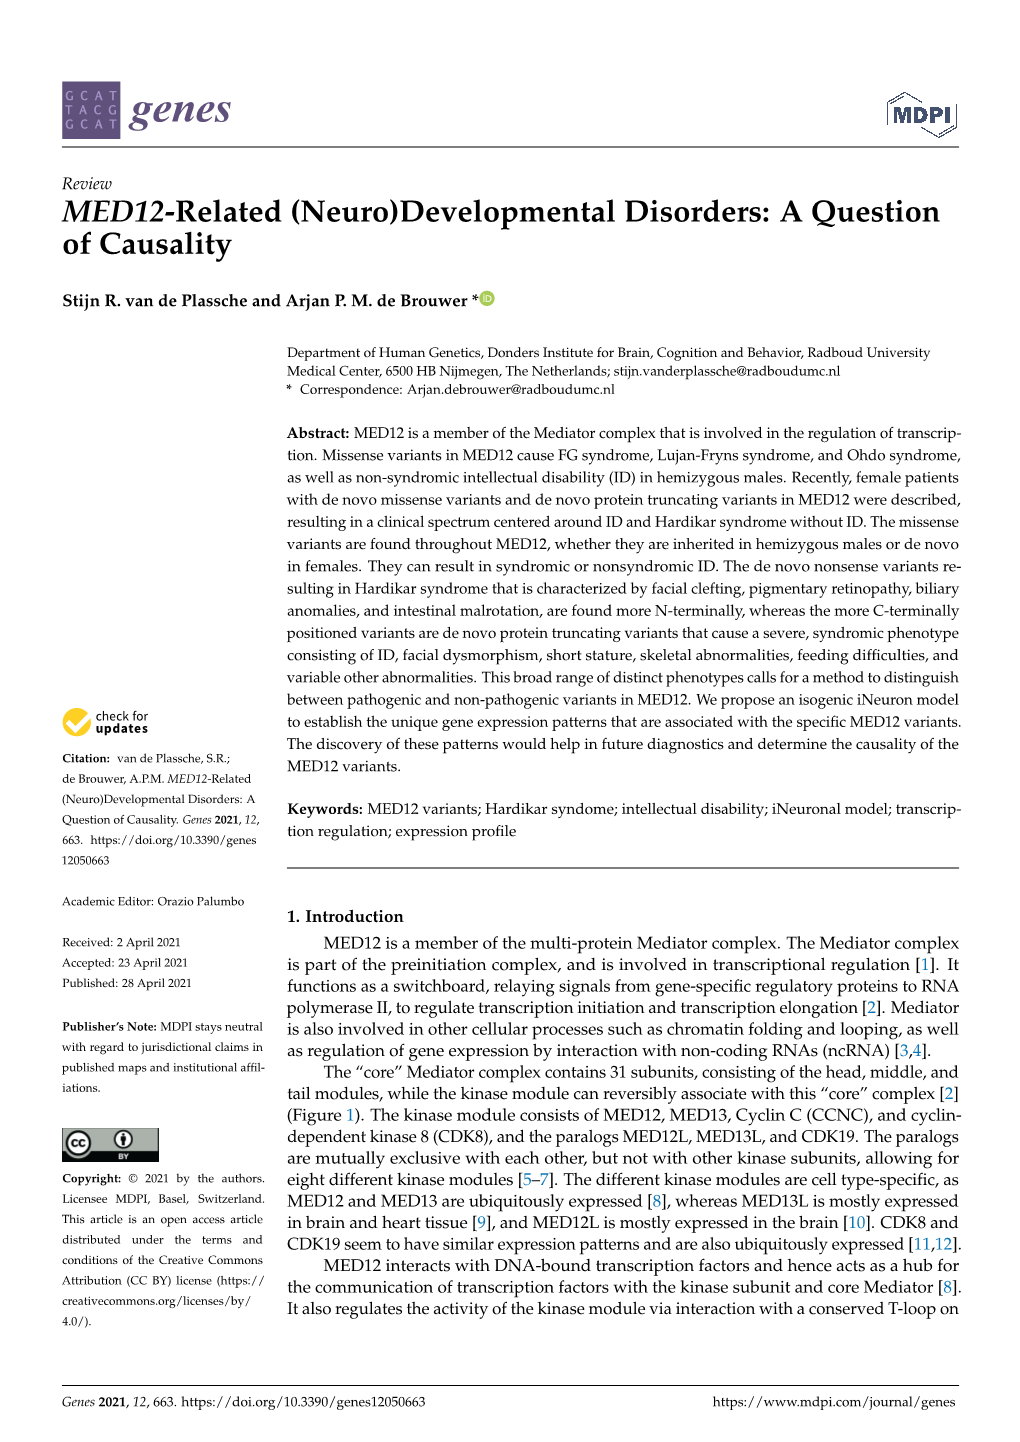 MED12-Related (Neuro)Developmental Disorders: a Question of Causality